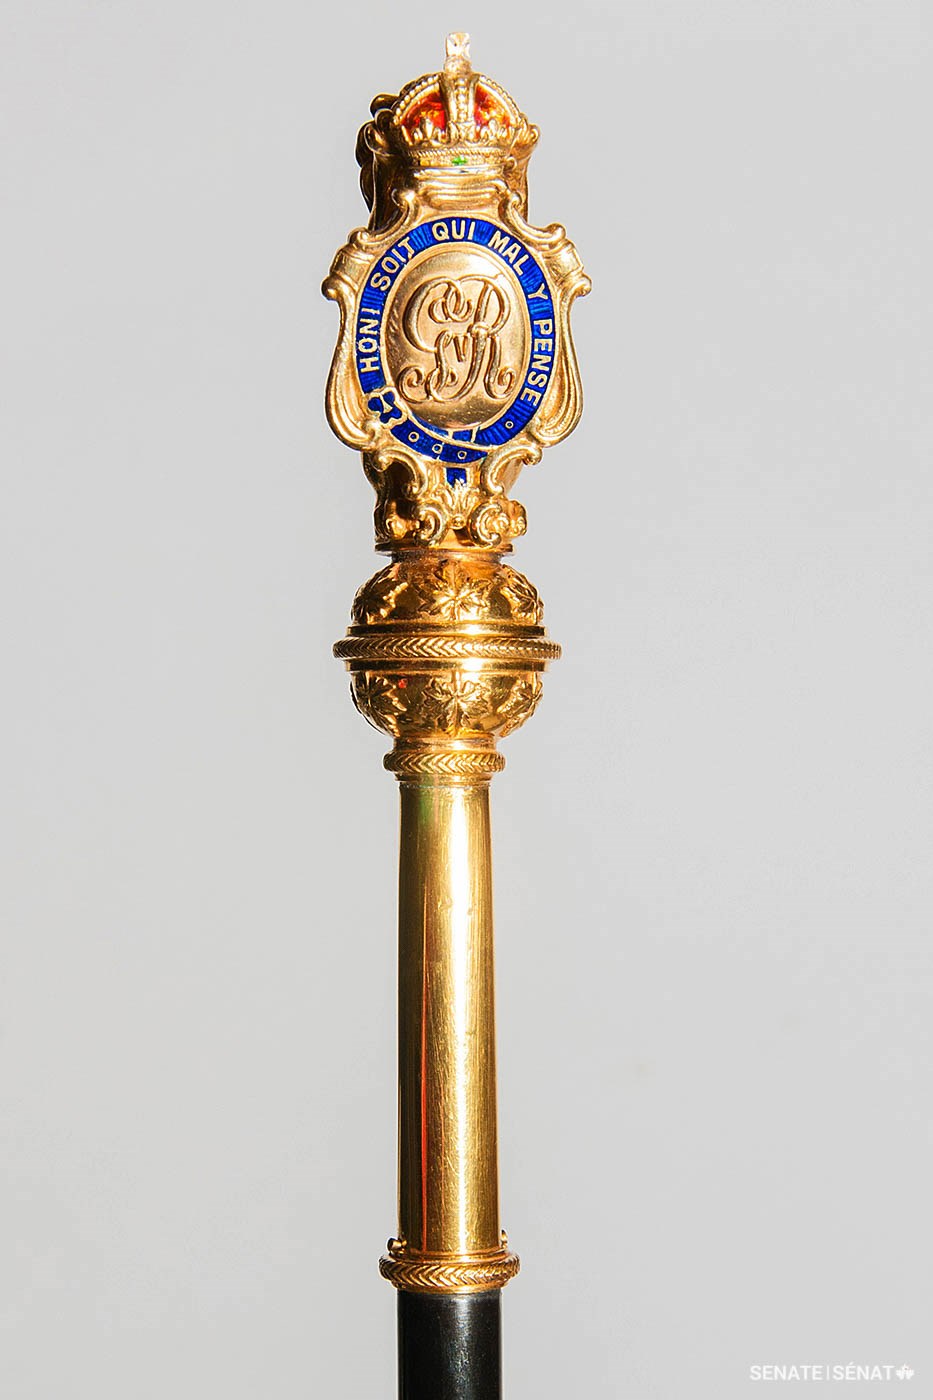 The Usher of the Black Rod’s ebony staff of office is capped by a shield displaying the royal cypher of King George V, Canada’s monarch when the staff was crafted in 1918.